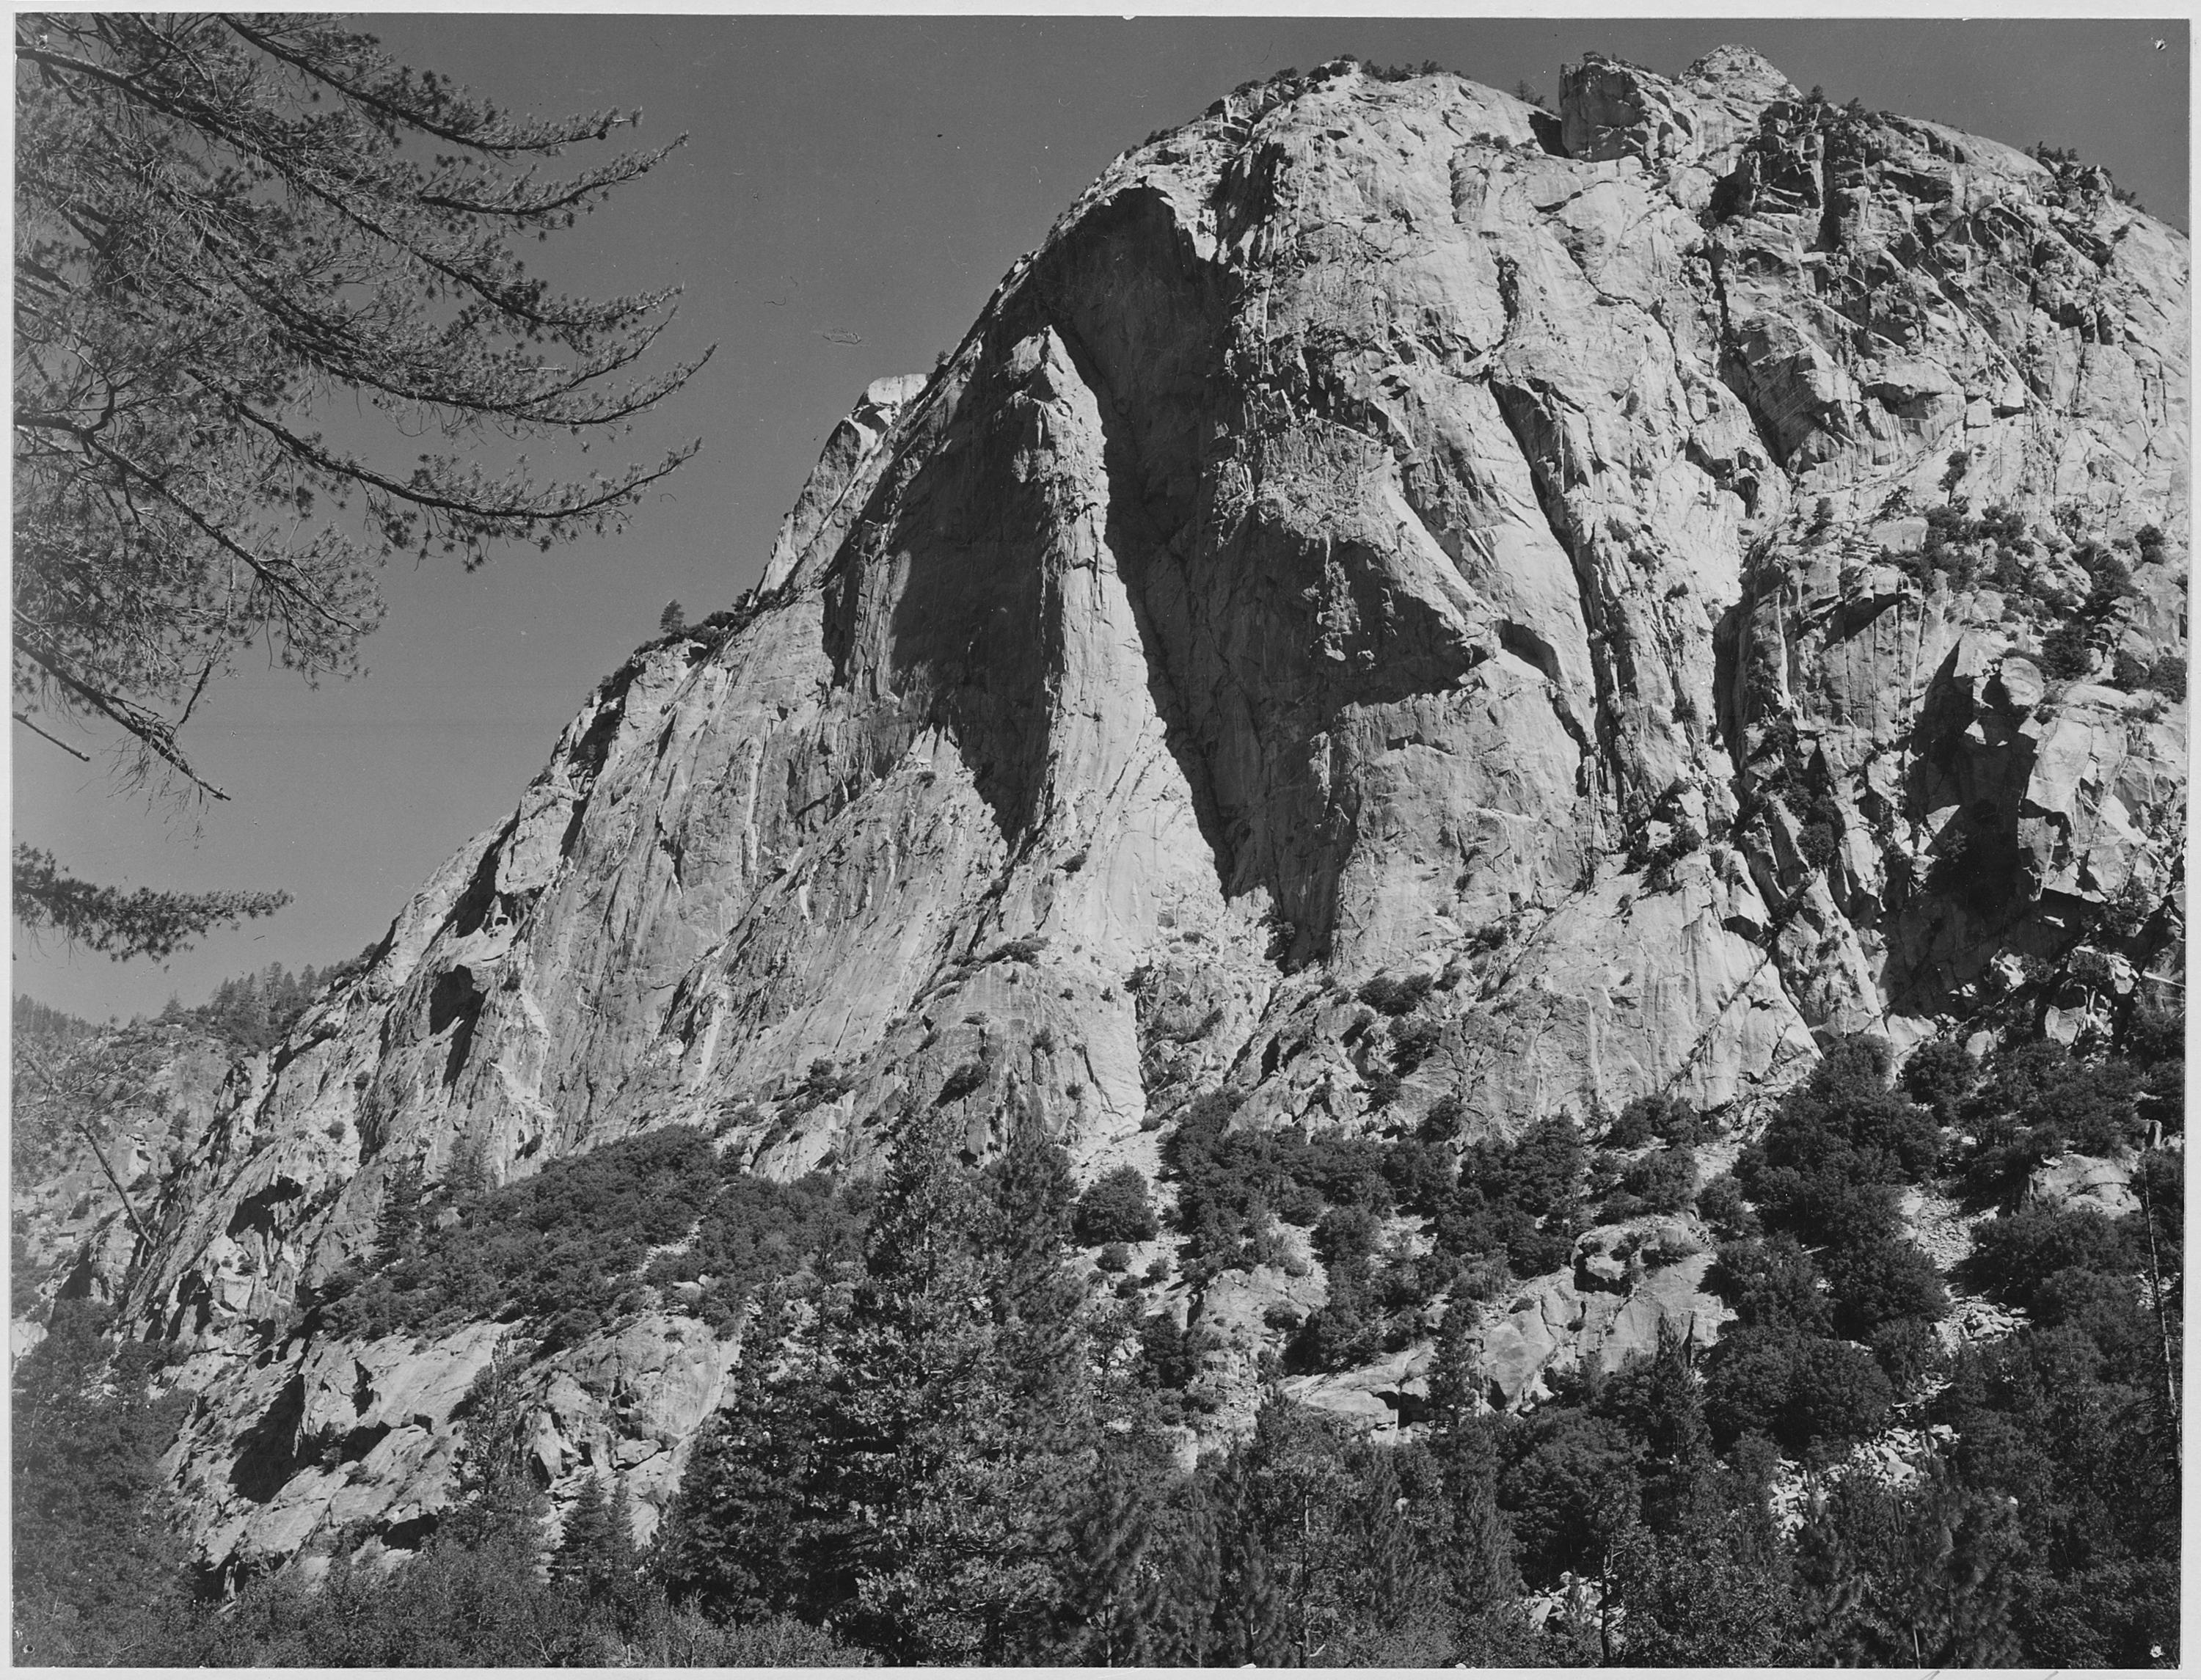 Ansel Adams - National Archives 79-AA-H05